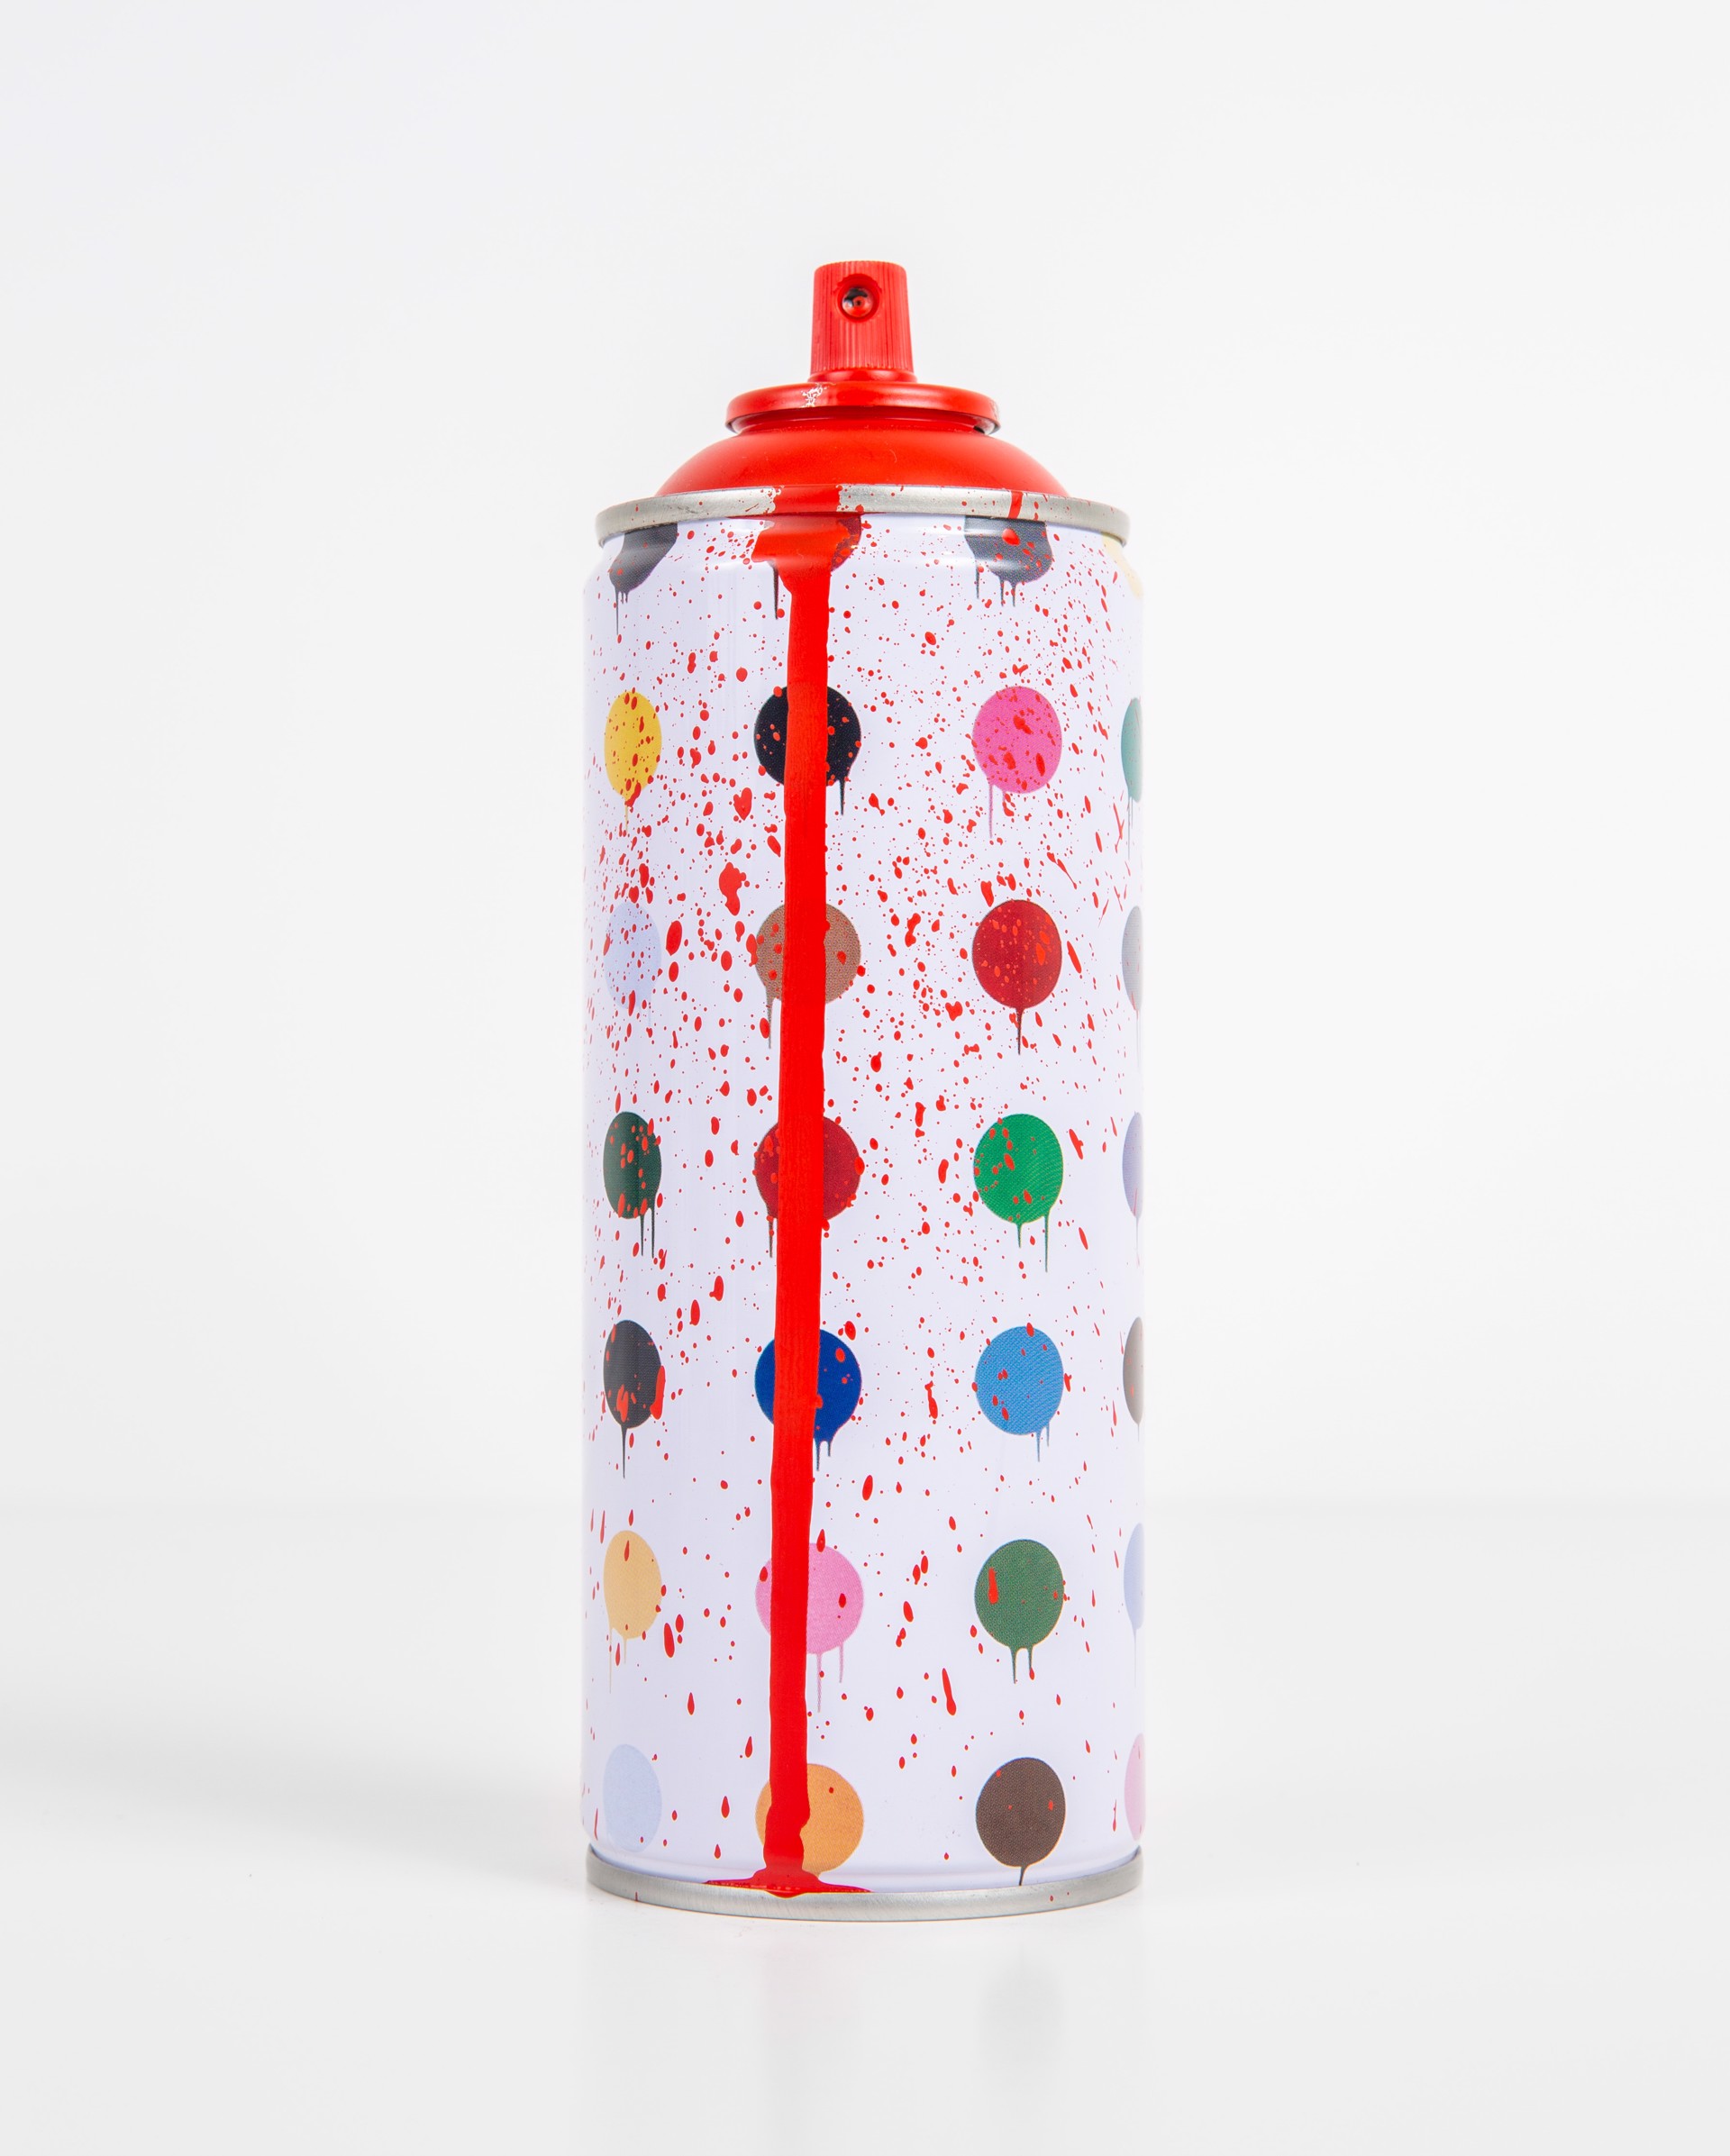 Hirst dots - Red by Mr.Brainwash